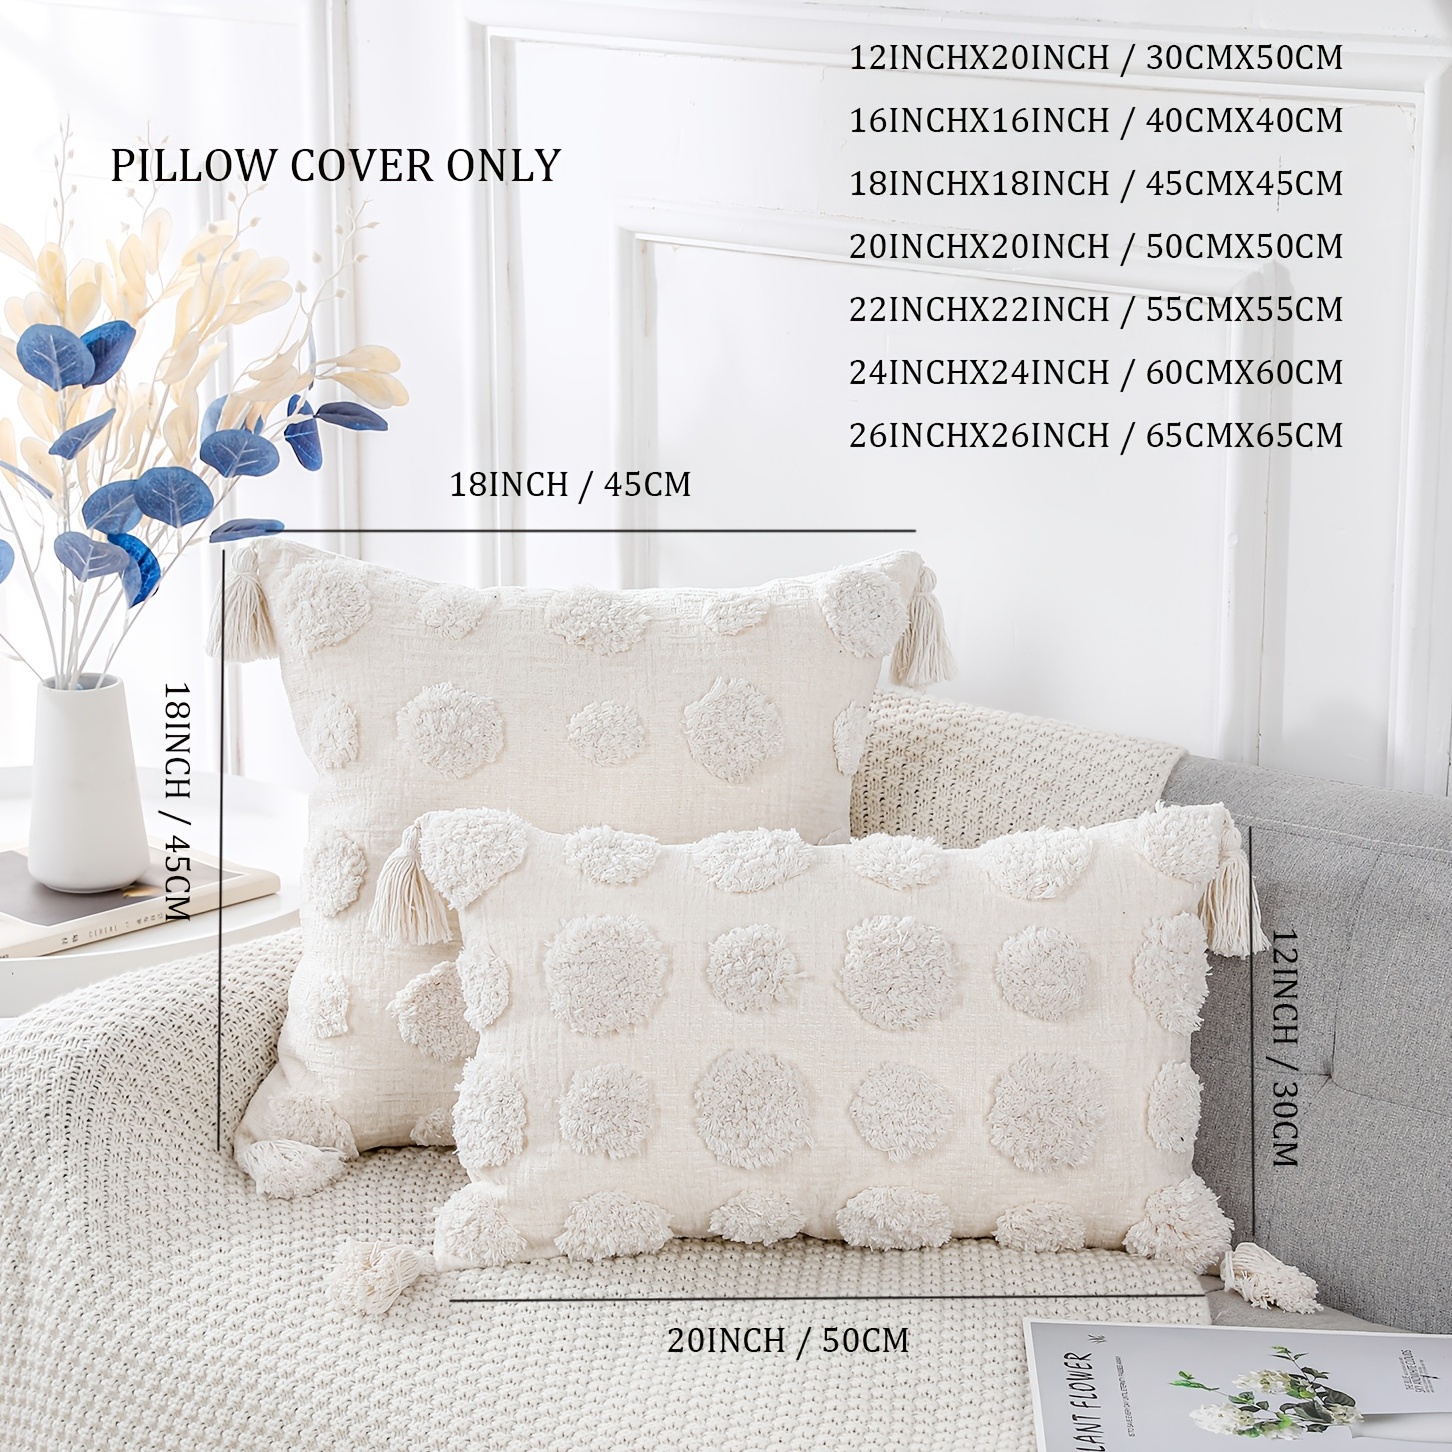 ZICANCN Fun Funny Traveler Decorative Throw Pillow Covers, Bed Couch Sofa  Decorative Knit Pillow Covers for Living Room Farmhouse 12x12 